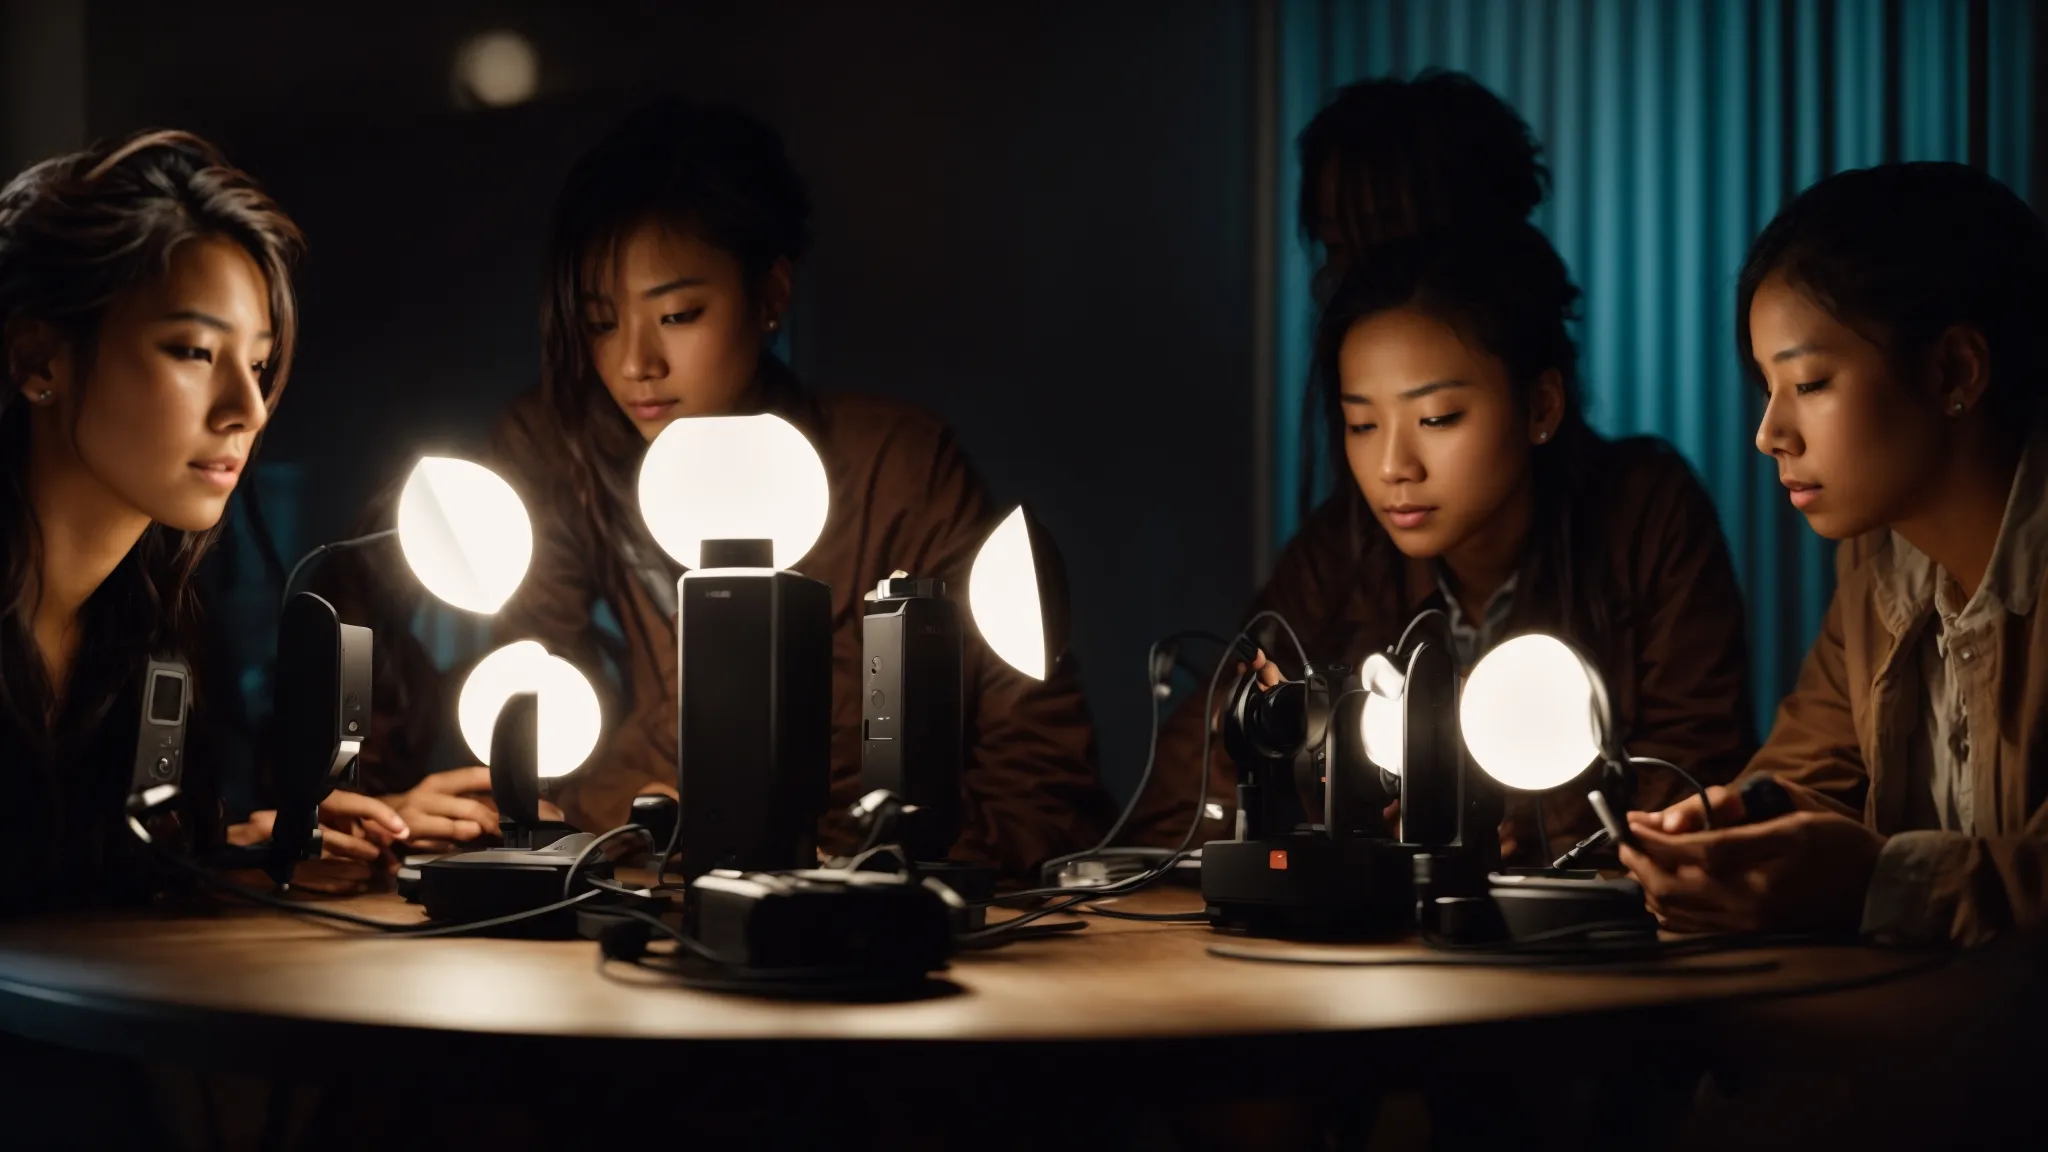 a group of diverse people animatedly discussing around a table with several vortex phones placed on it, illuminated by the soft glow of the devices.